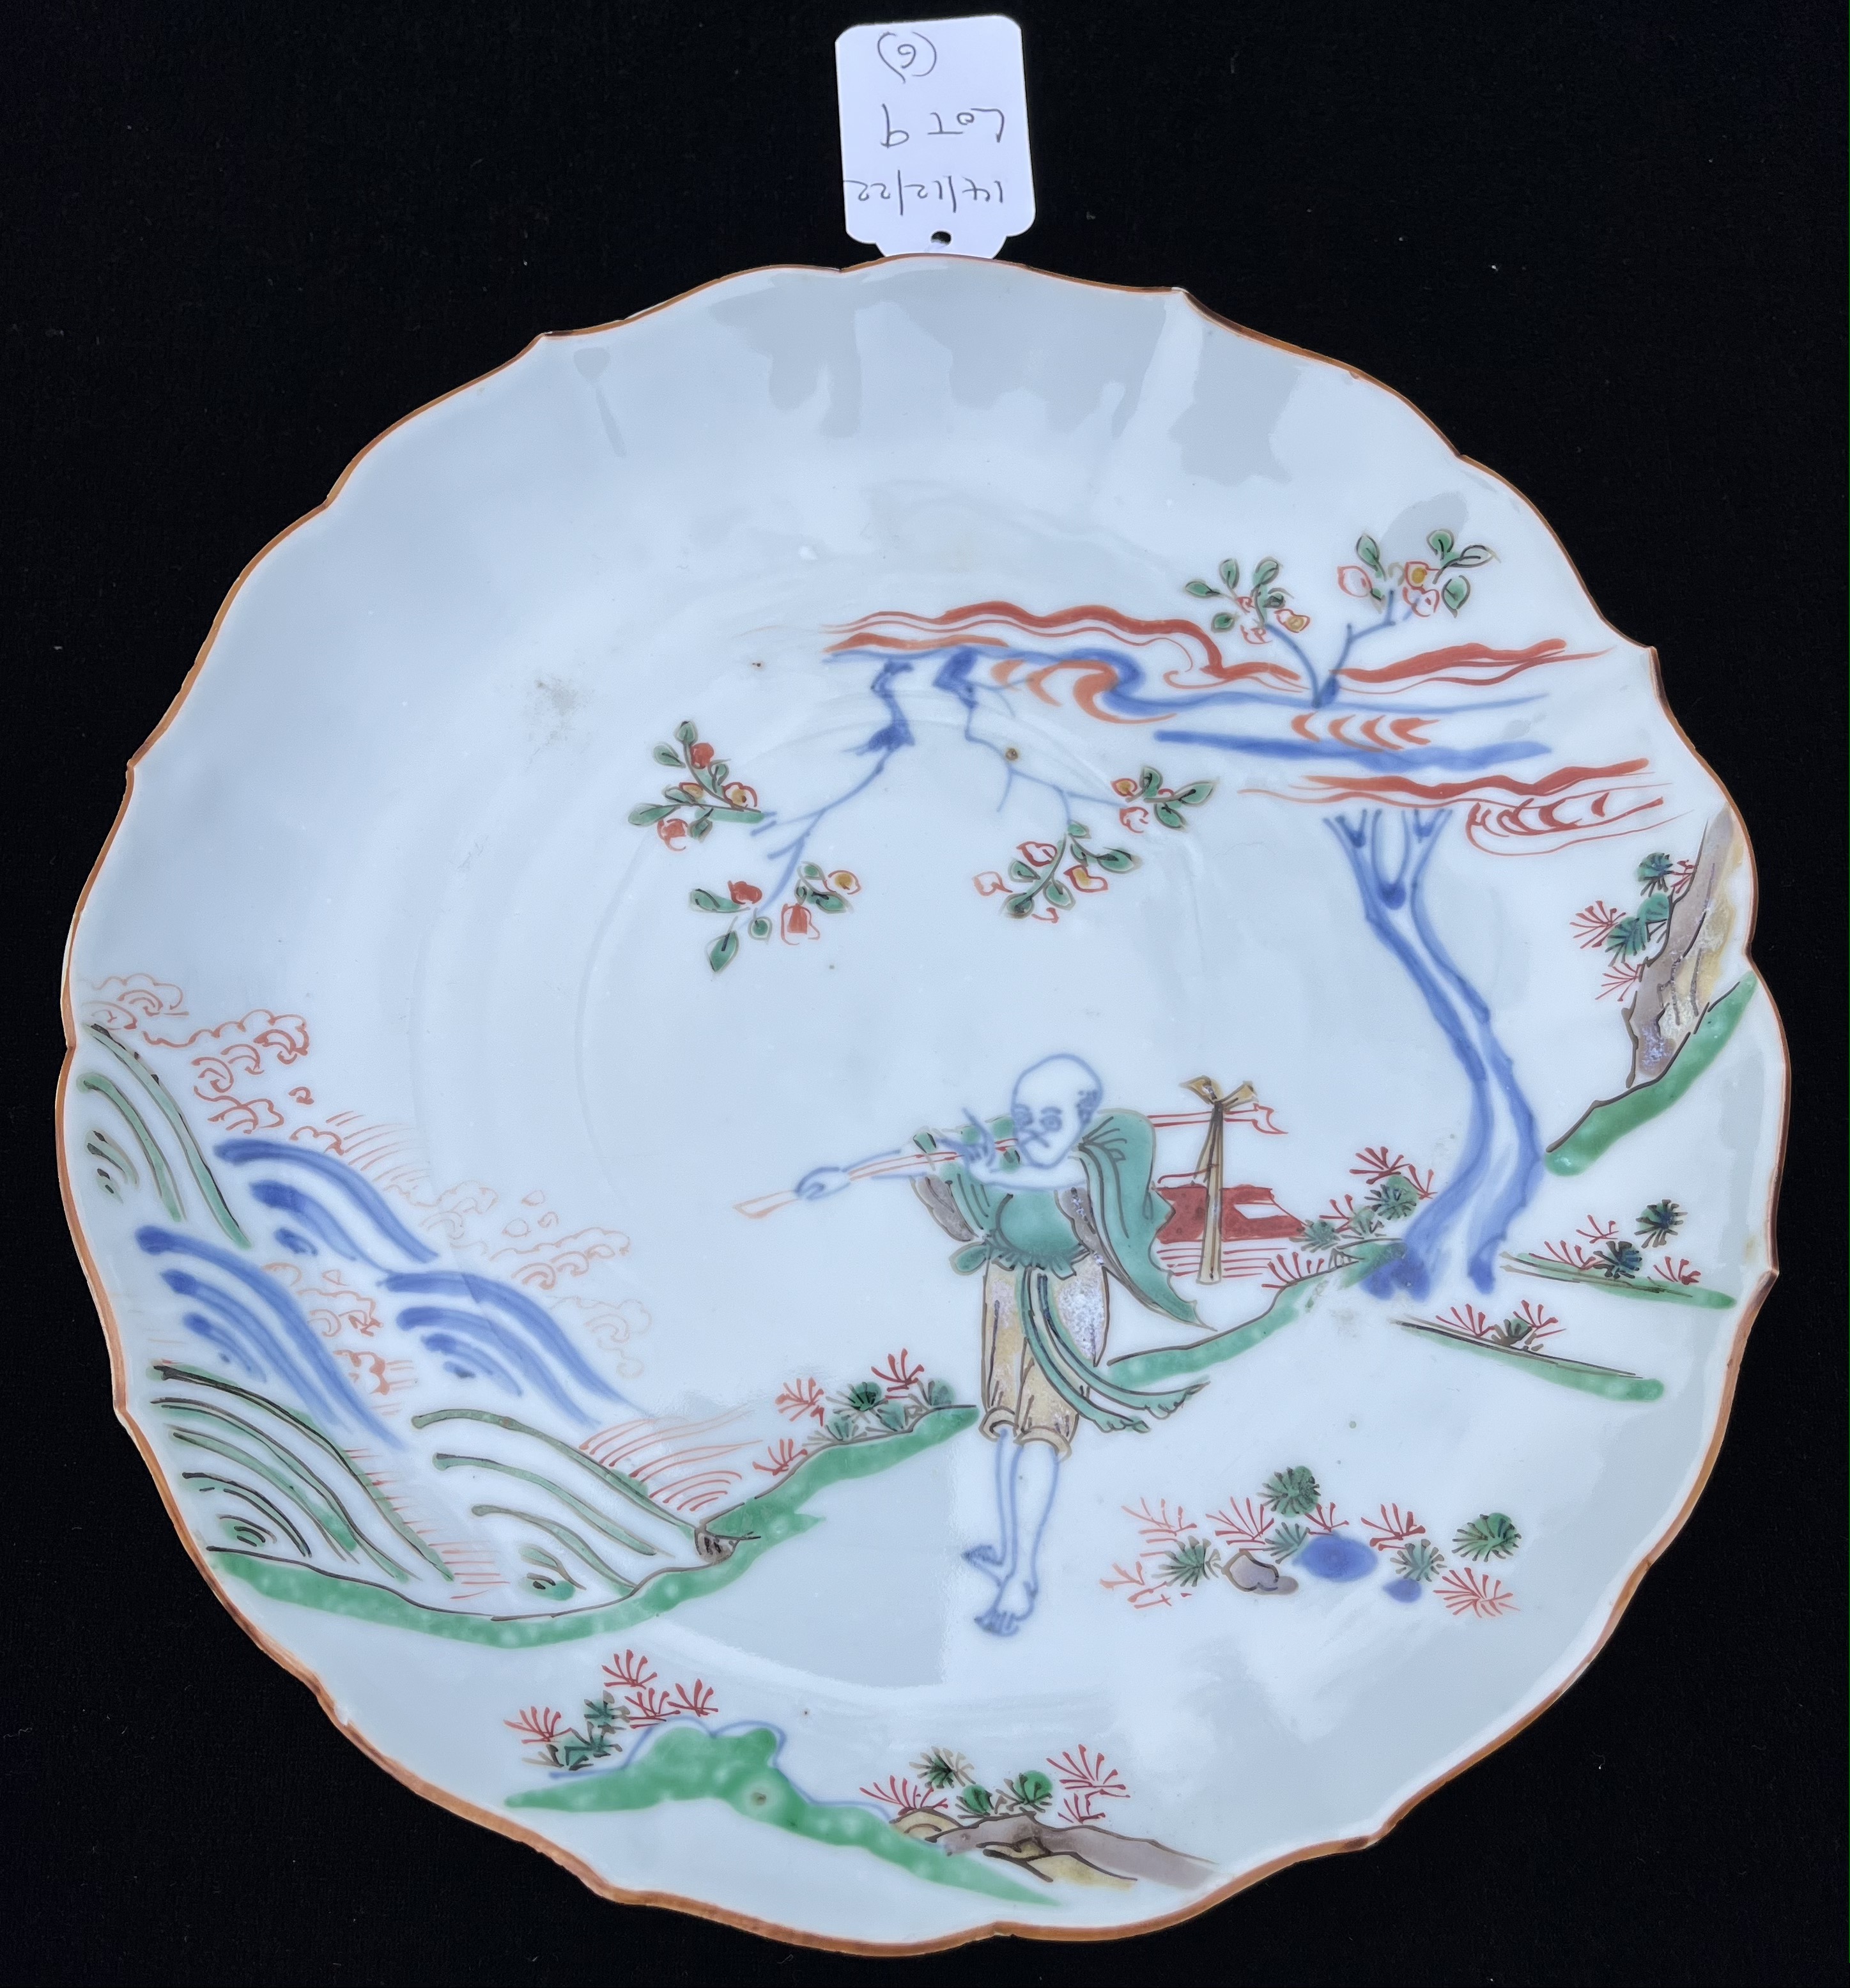 A SET OF FIVE CHINESE UNDERGLAZE-BLUE AND ENAMELLED SERVING DISHES, CHONGZHEN PERIOD, 1628 - 1644 - Image 7 of 8